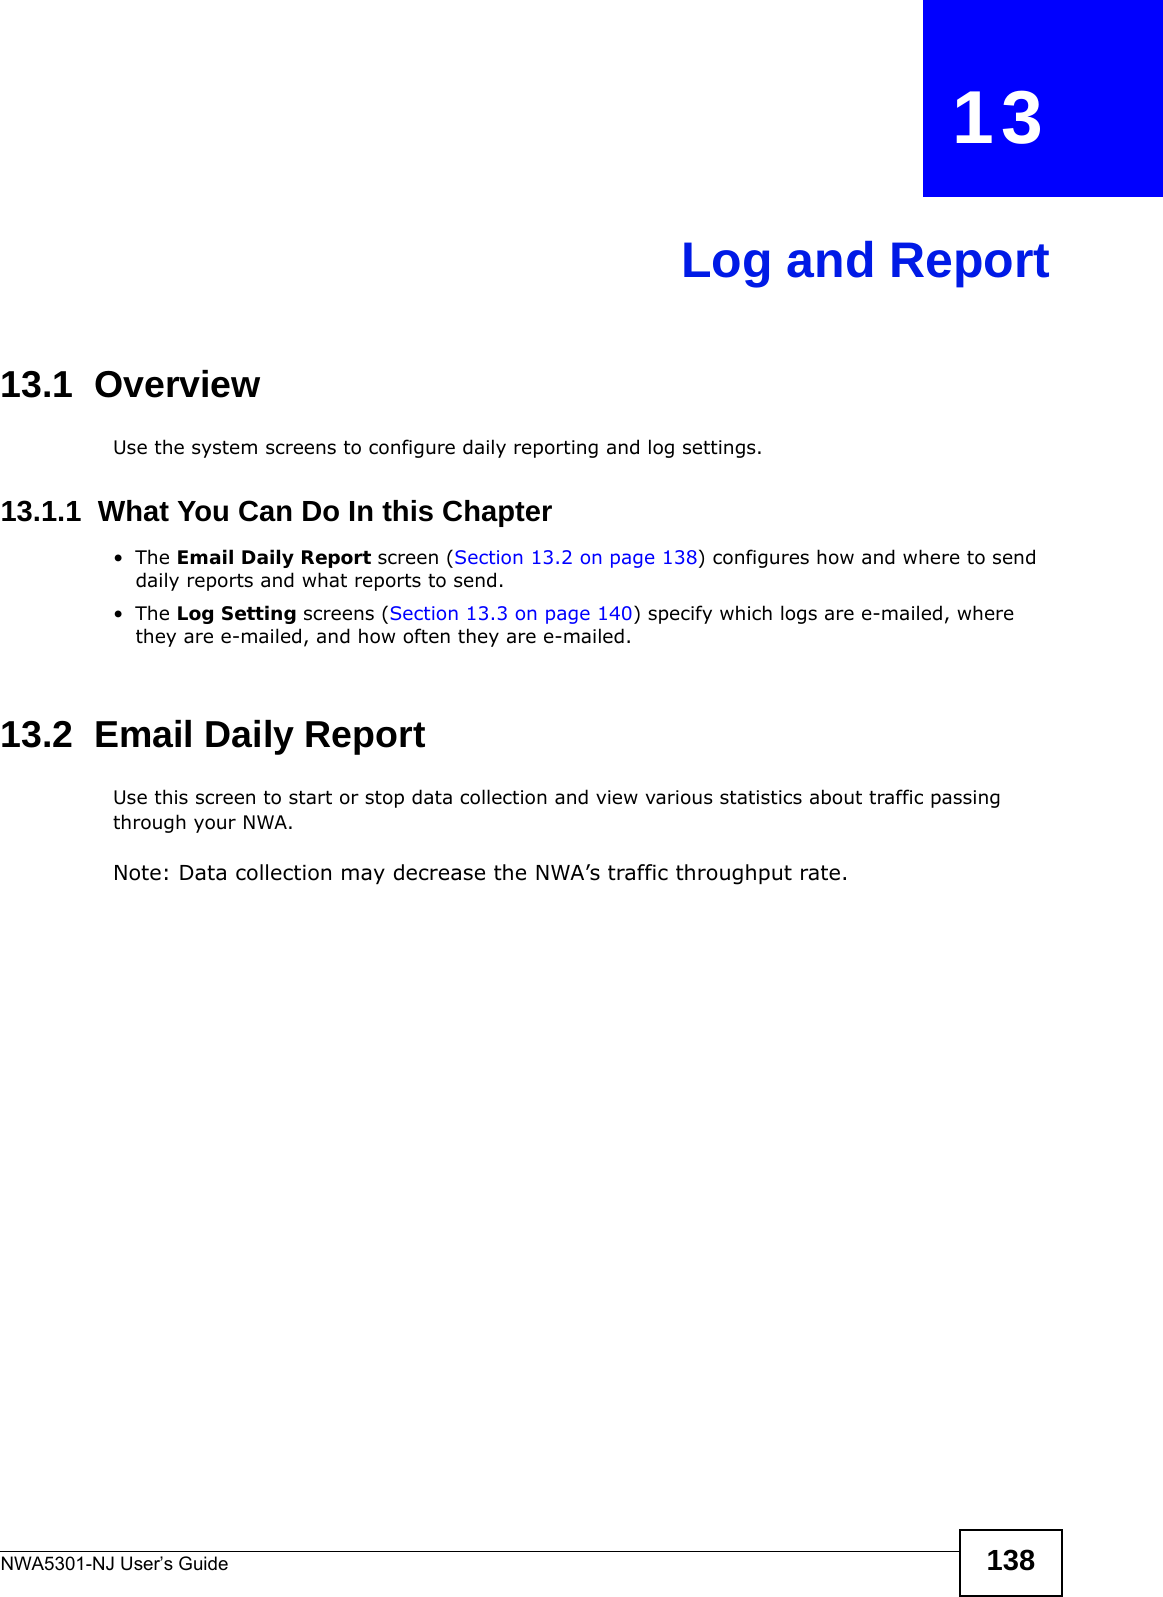 NWA5301-NJ User’s Guide 138CHAPTER   13Log and Report13.1  OverviewUse the system screens to configure daily reporting and log settings. 13.1.1  What You Can Do In this Chapter•The Email Daily Report screen (Section 13.2 on page 138) configures how and where to send daily reports and what reports to send.•The Log Setting screens (Section 13.3 on page 140) specify which logs are e-mailed, where they are e-mailed, and how often they are e-mailed.13.2  Email Daily ReportUse this screen to start or stop data collection and view various statistics about traffic passing through your NWA. Note: Data collection may decrease the NWA’s traffic throughput rate.